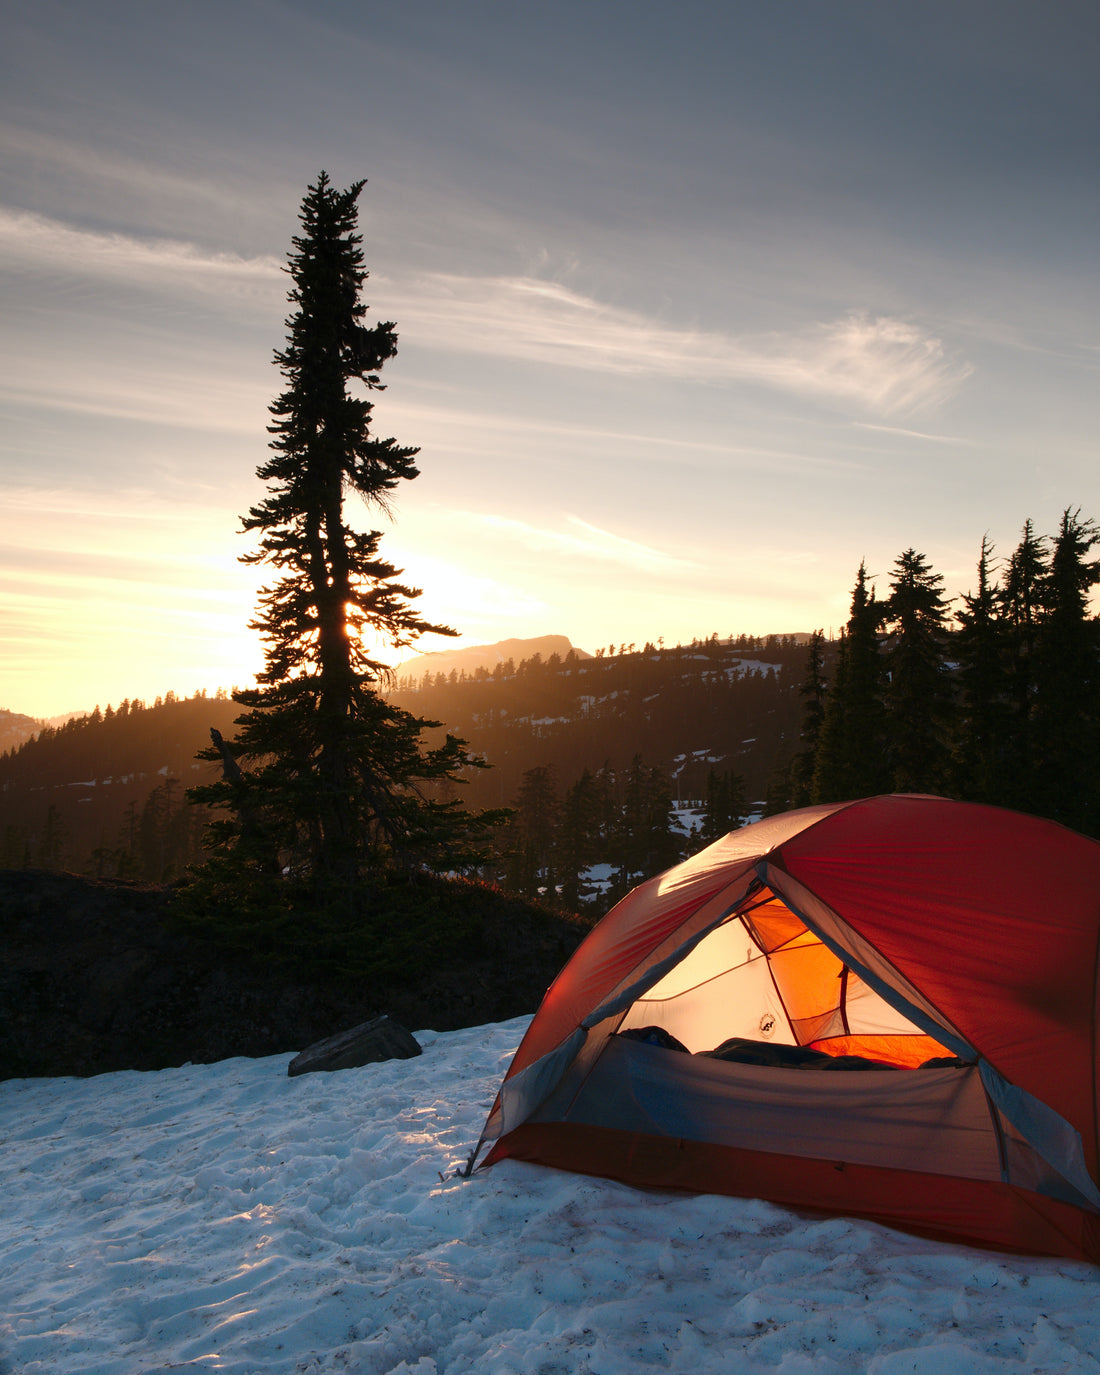 Winter Wonderland: The Top 10 Camping Tips for Staying Warm and Comfy